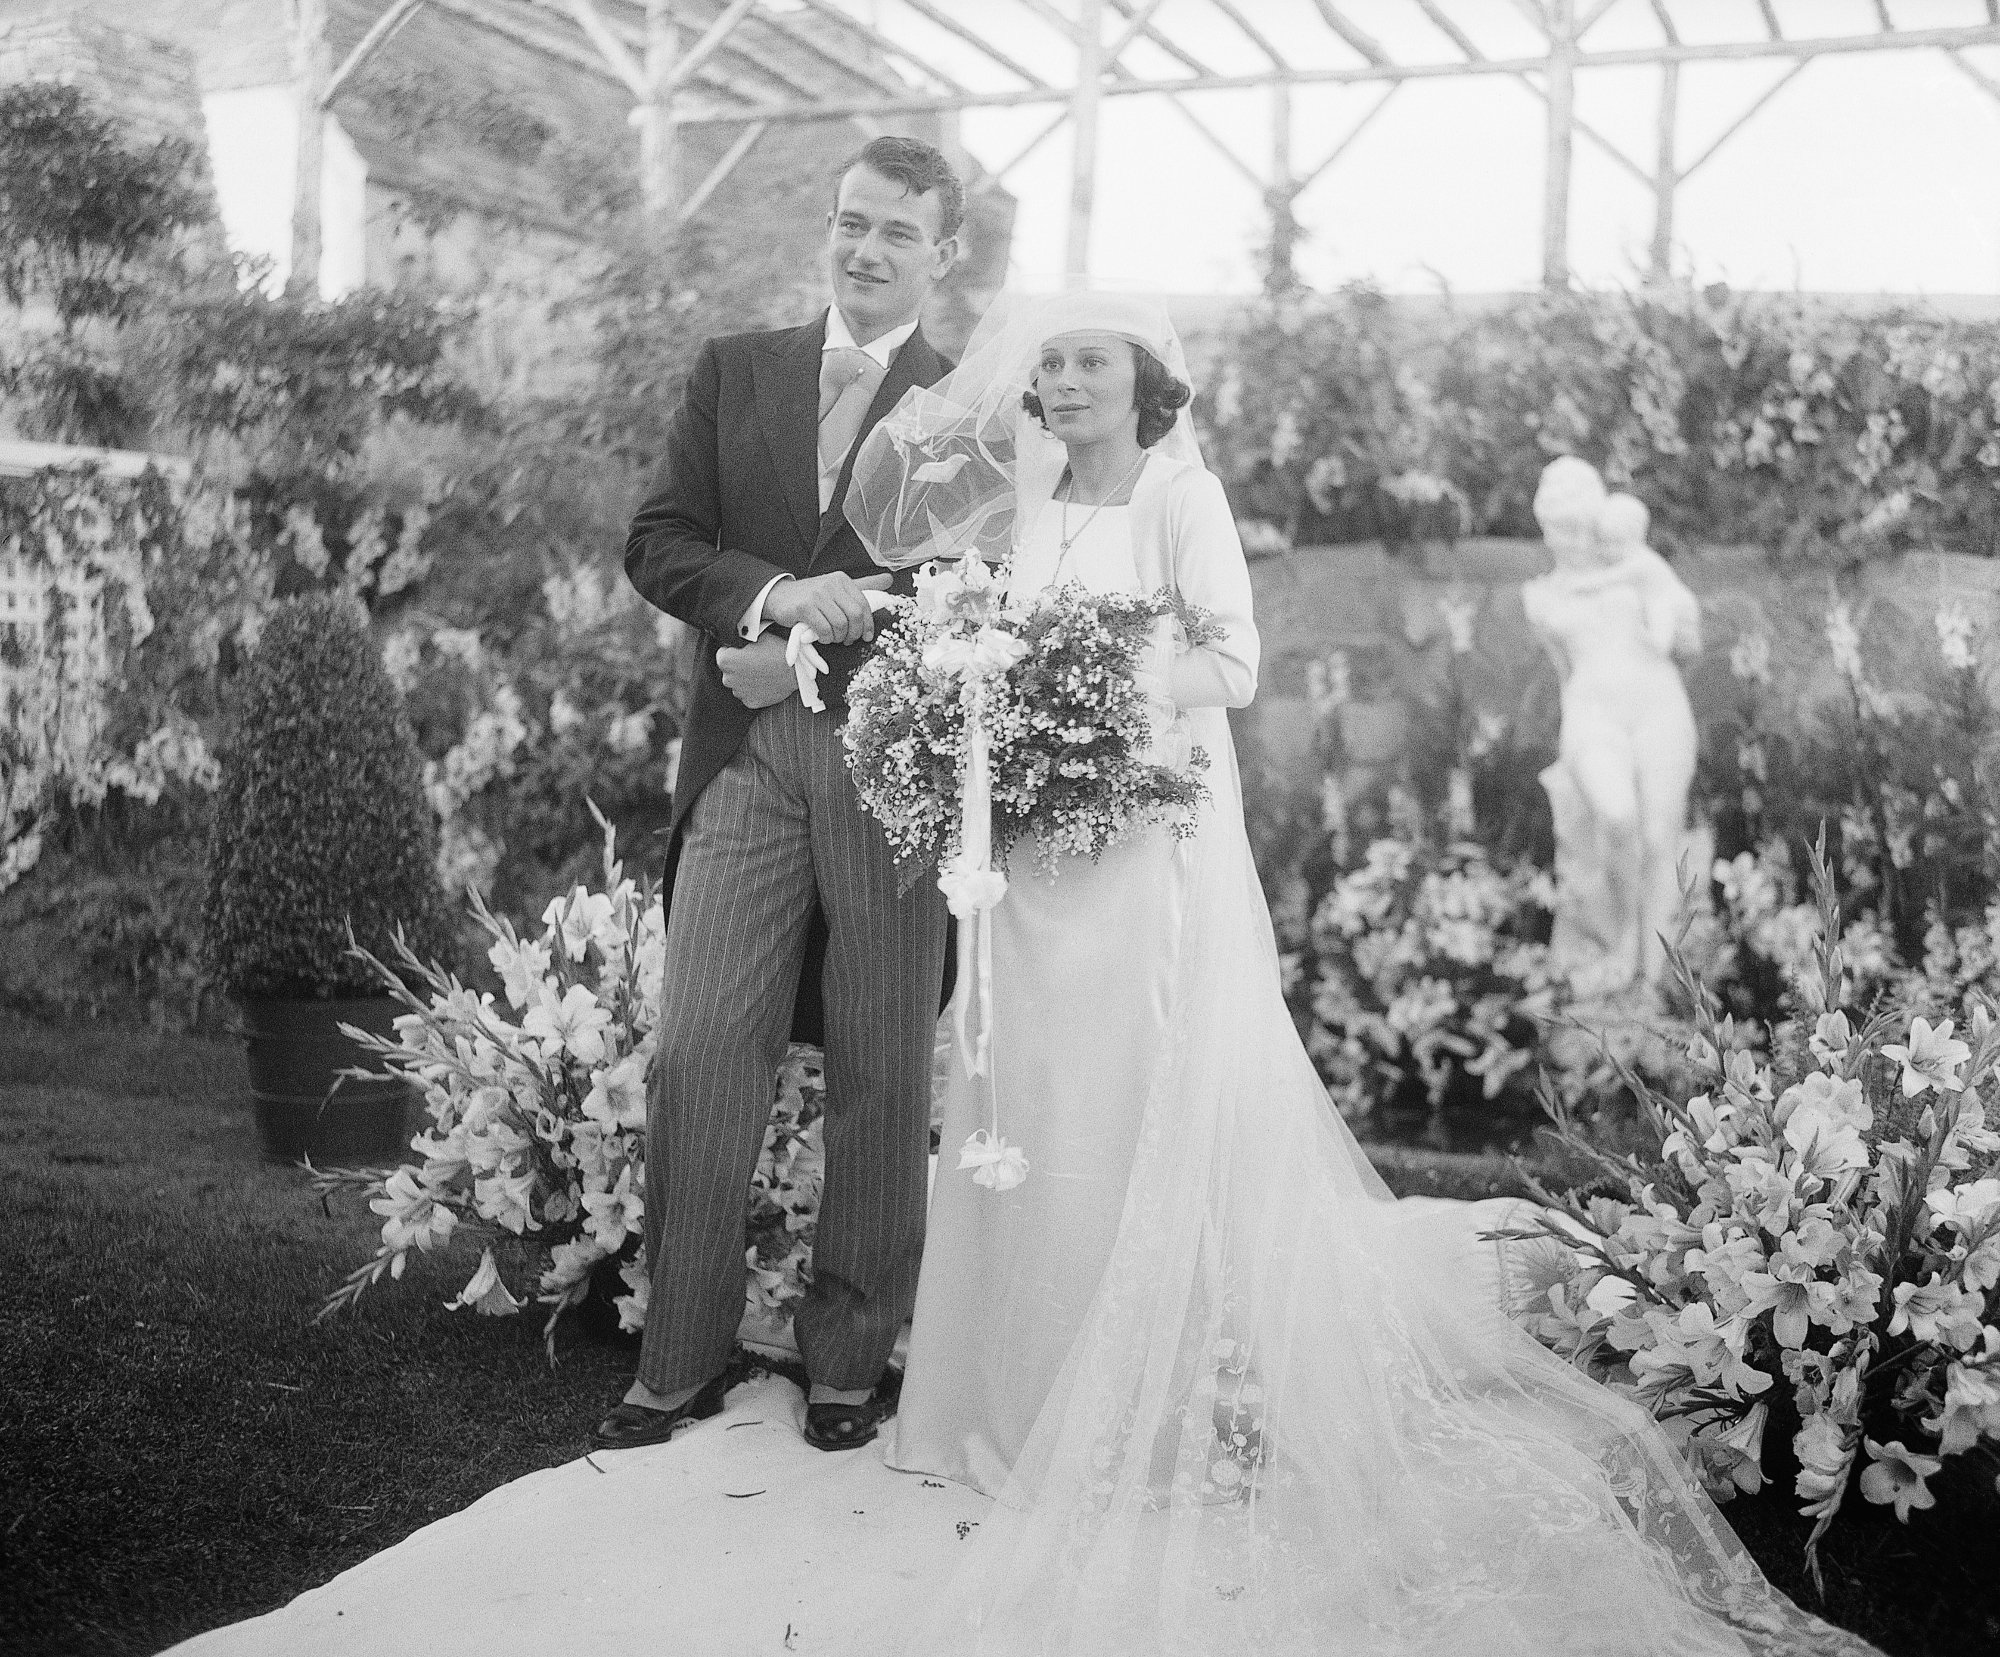 John Wayne and wife Josephine Saenz in wedding attire in front of flowers